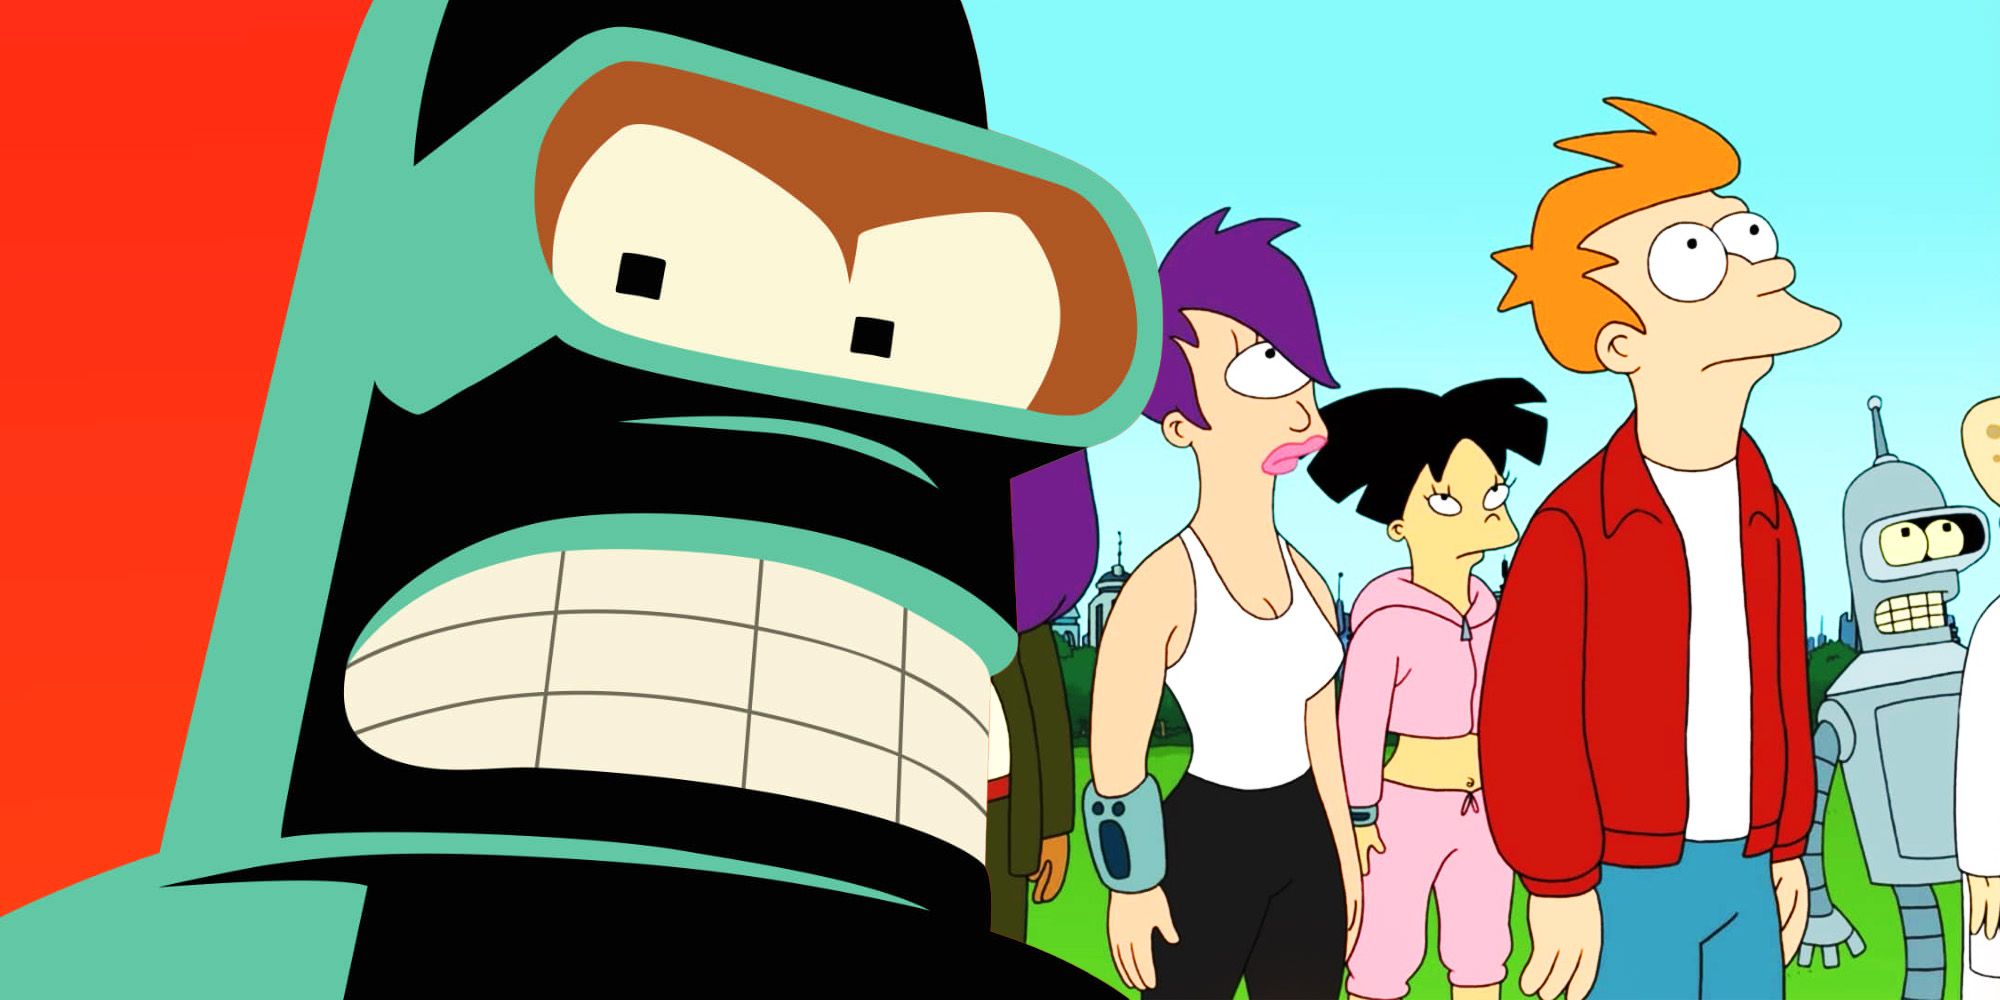 Composite image of characters from Futurama